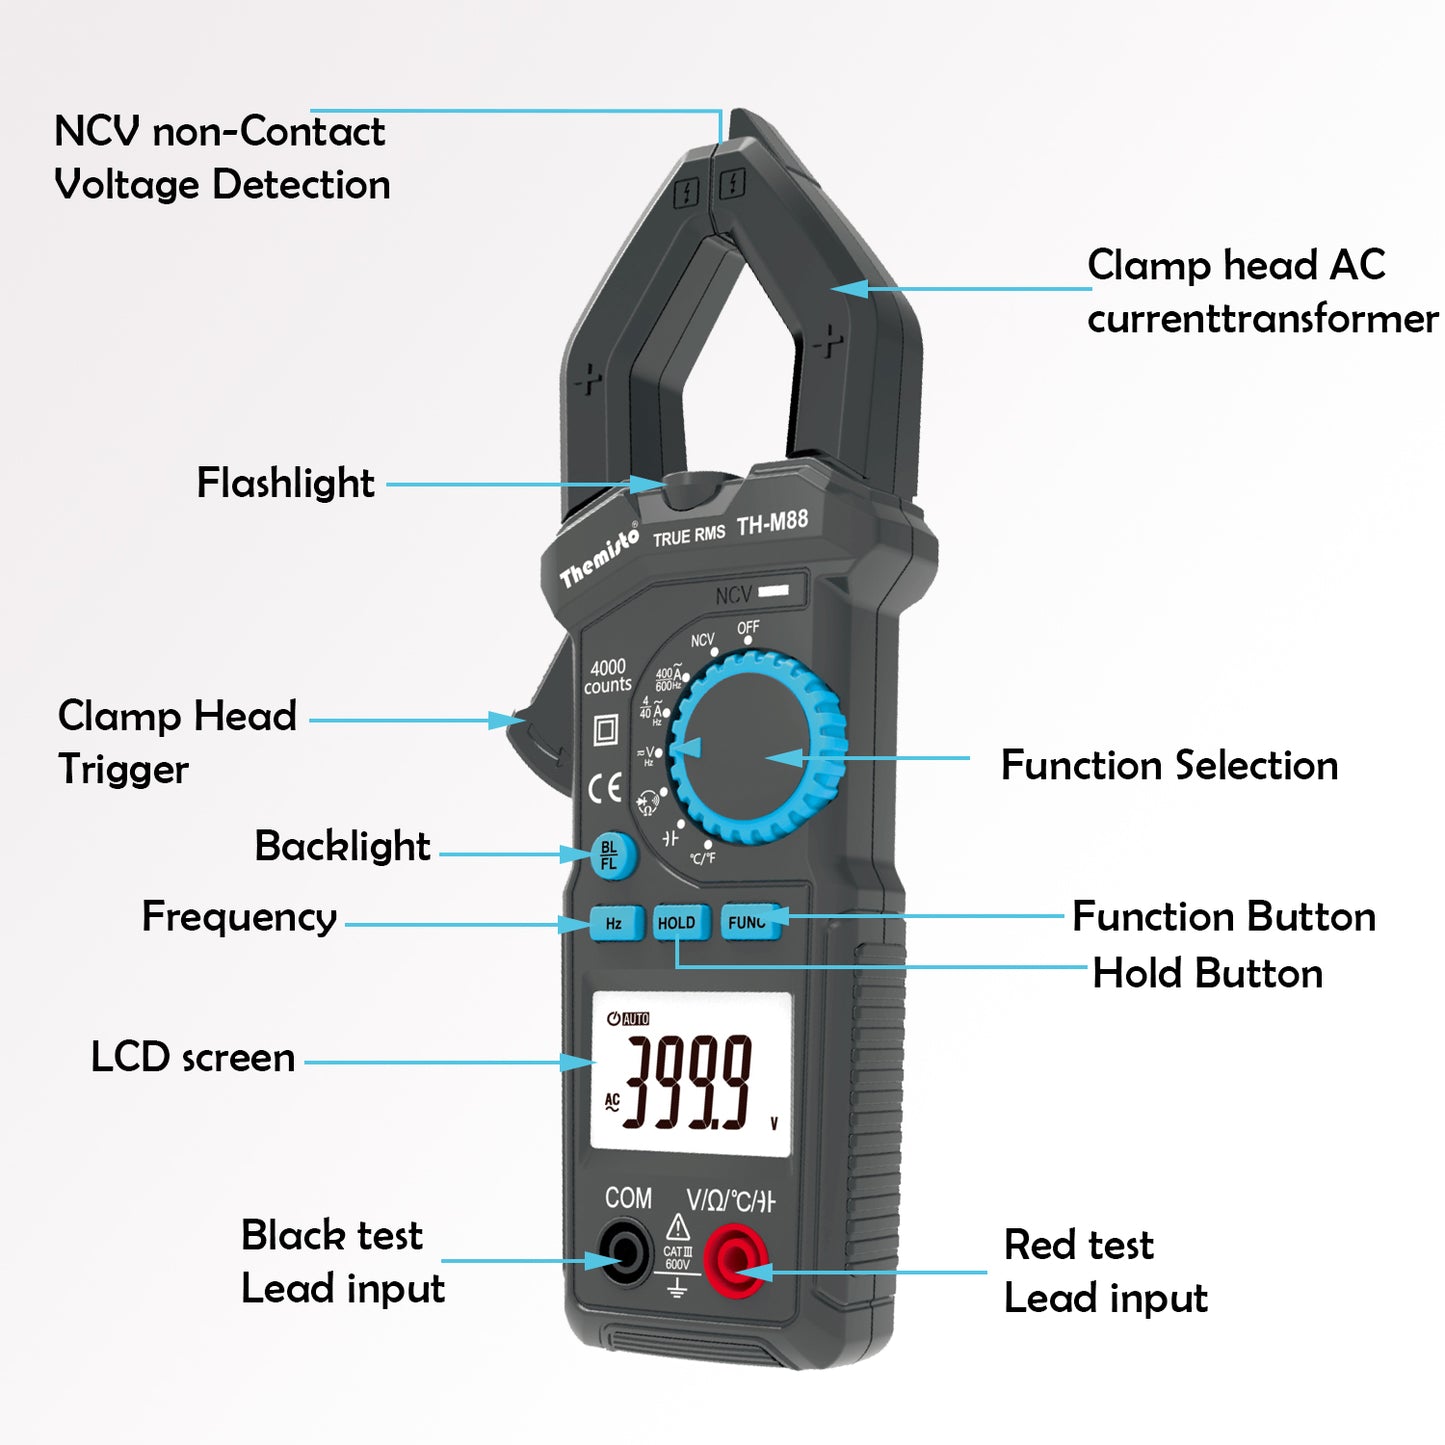 Themisto TH-M88 True RMS Digital Clamp Meter (600A,4000 Counts)